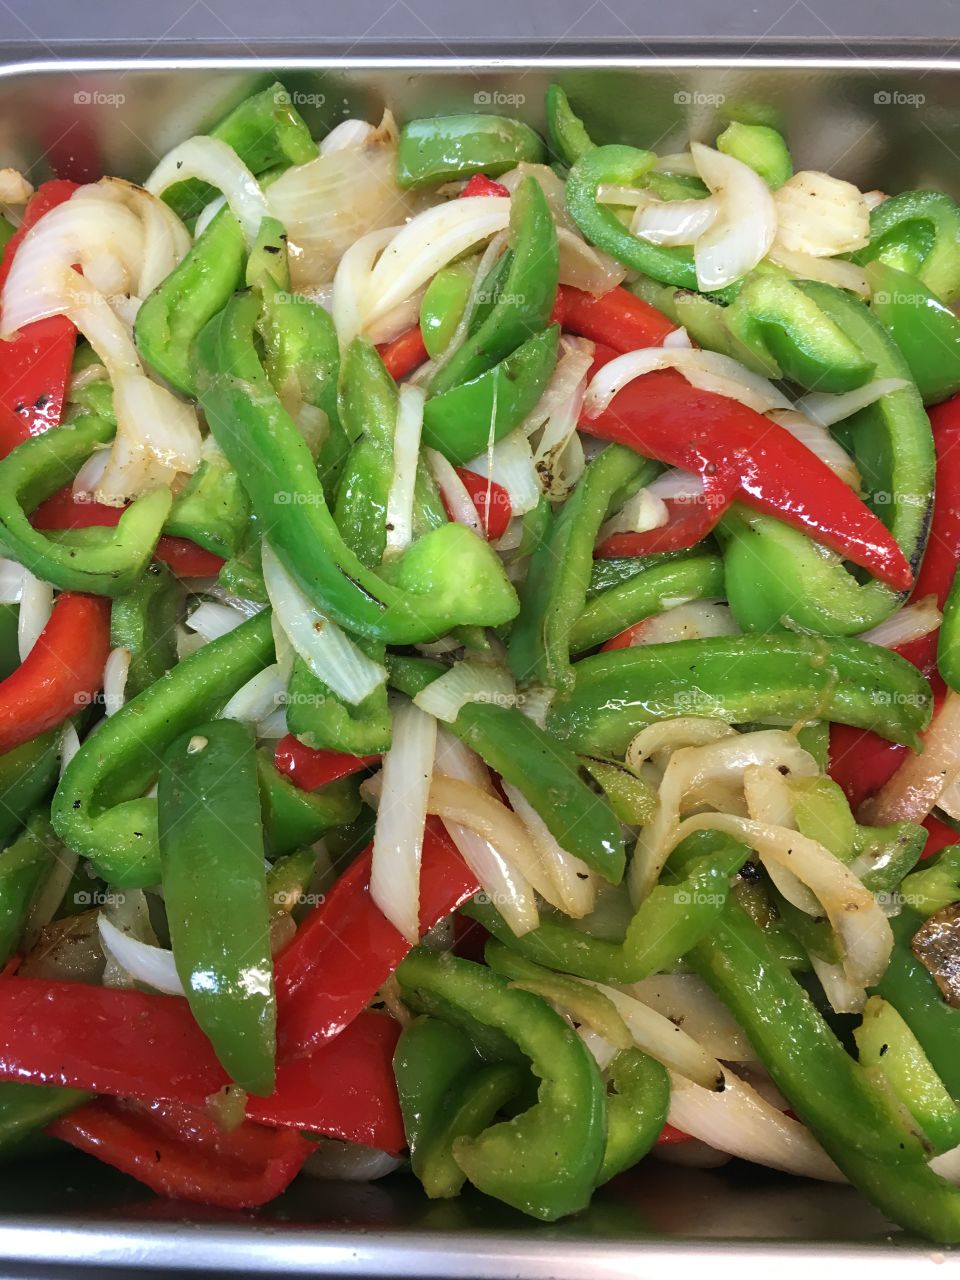 Crunchy peppers